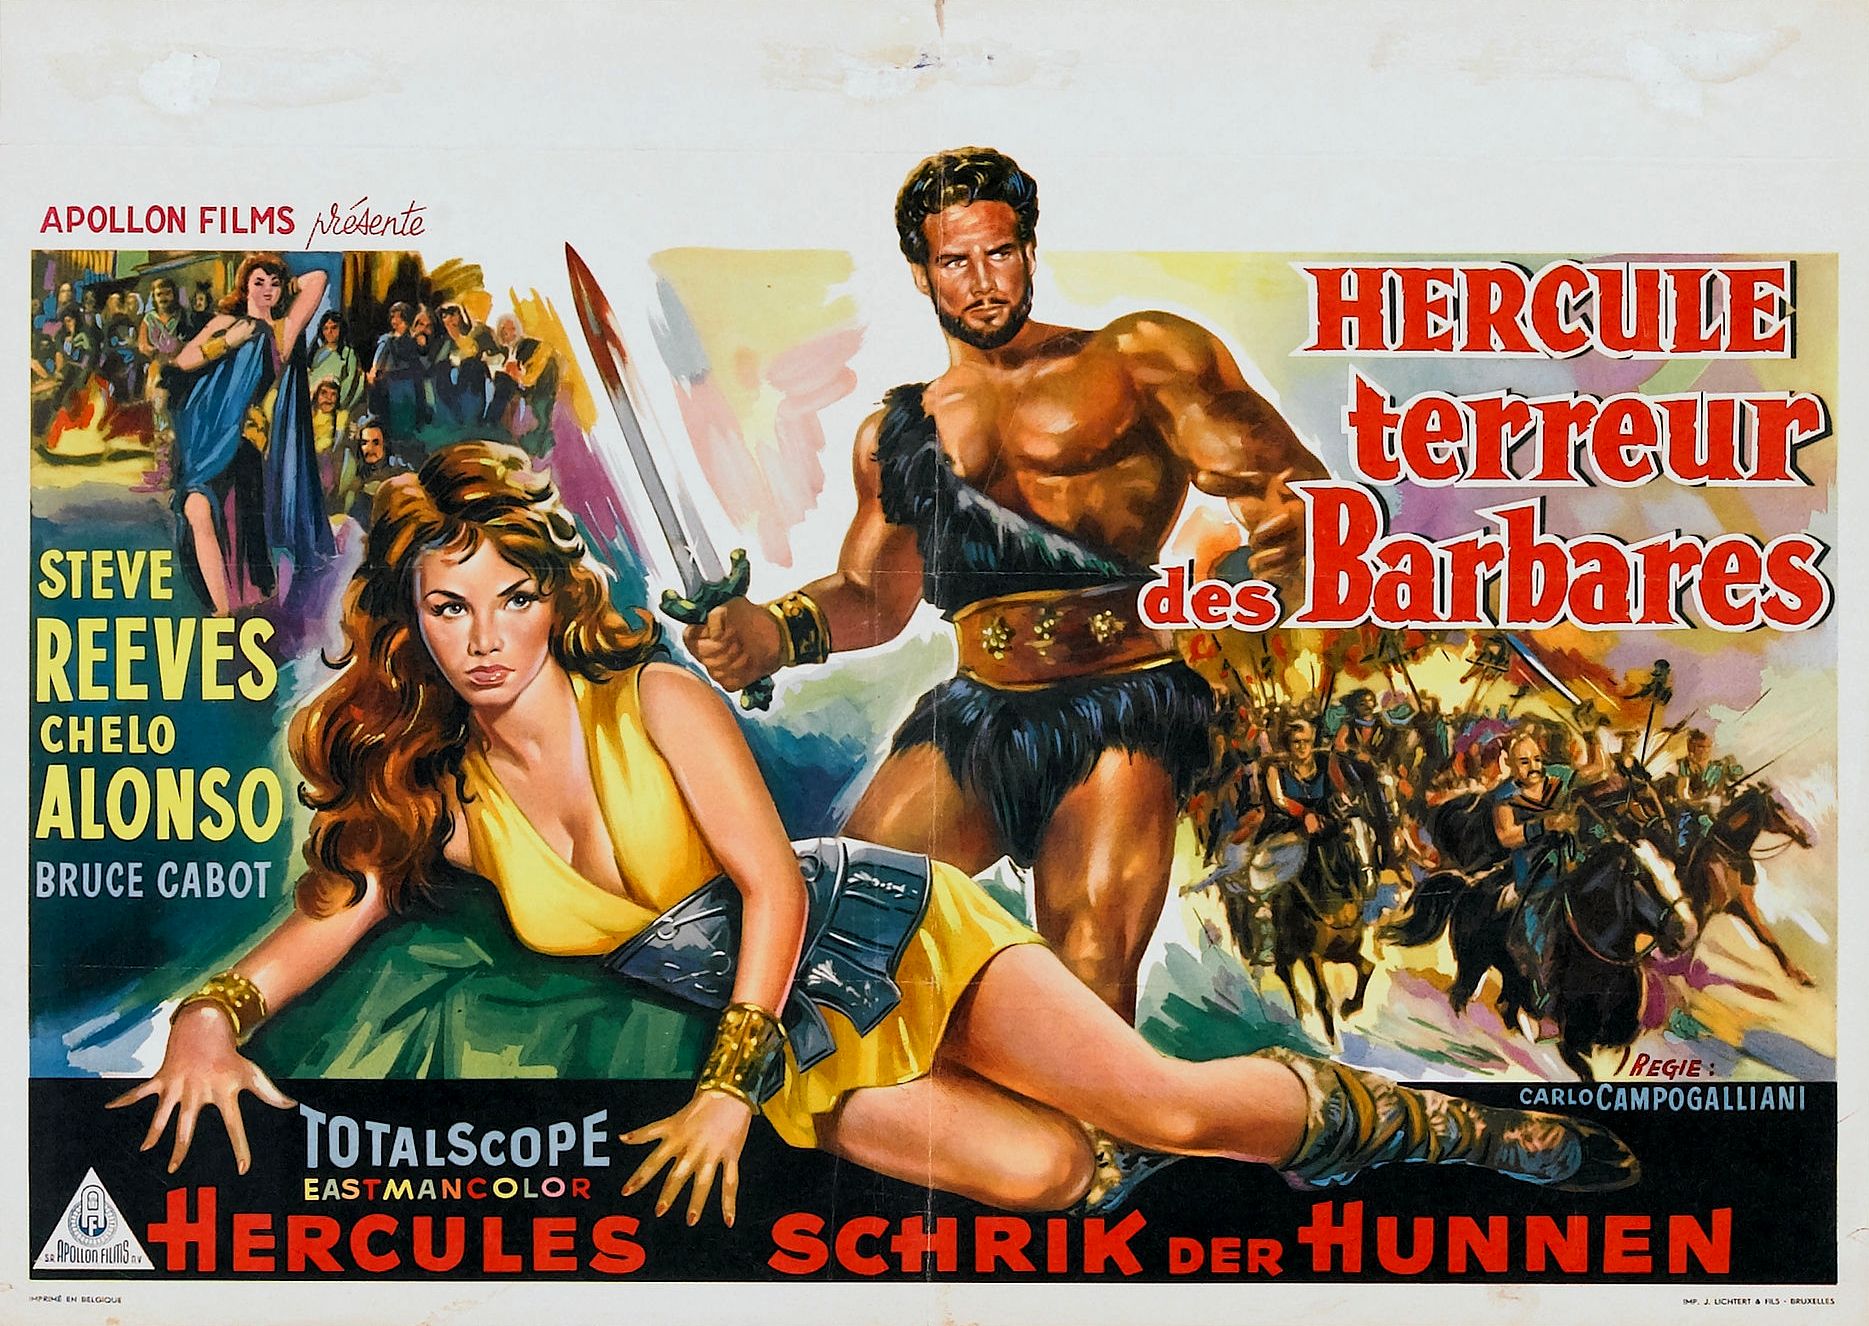 Goliath and the Barbarians (1959)